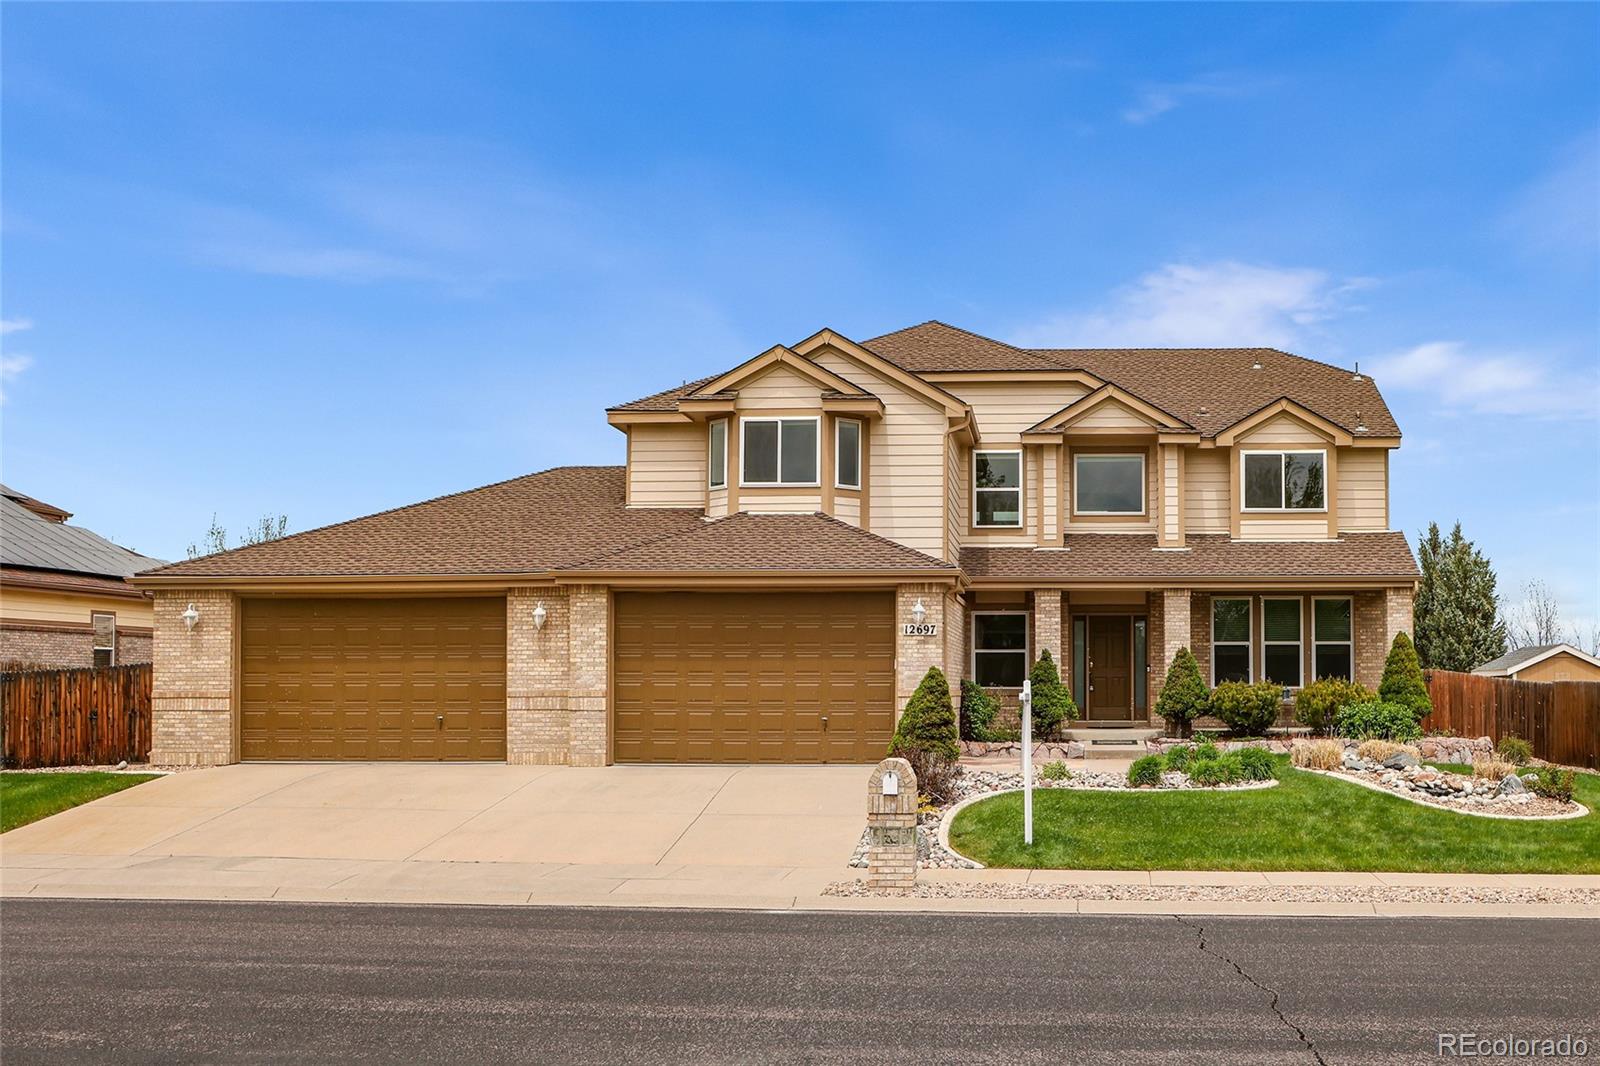 Report Image for 12697 W 83rd Drive,Arvada, Colorado